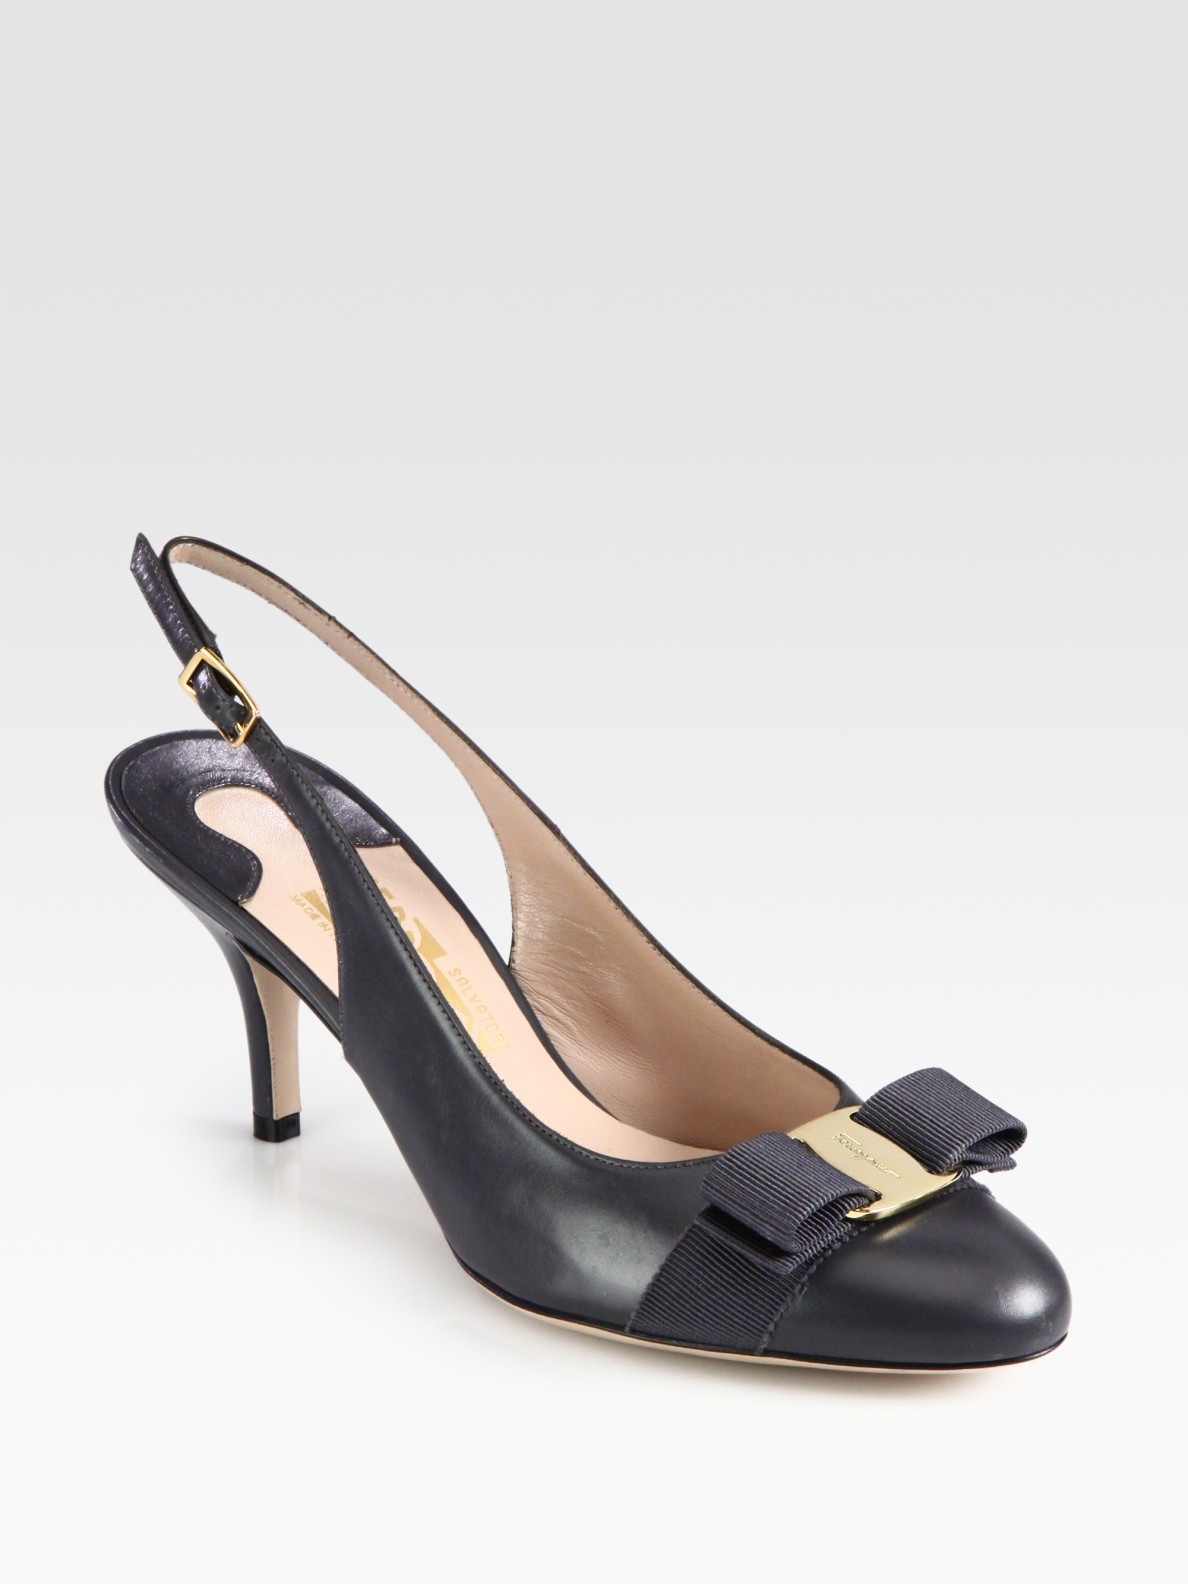 Ferragamo Flavia Leather Bow Slingback Pumps in Charcoal (Gray) - Lyst